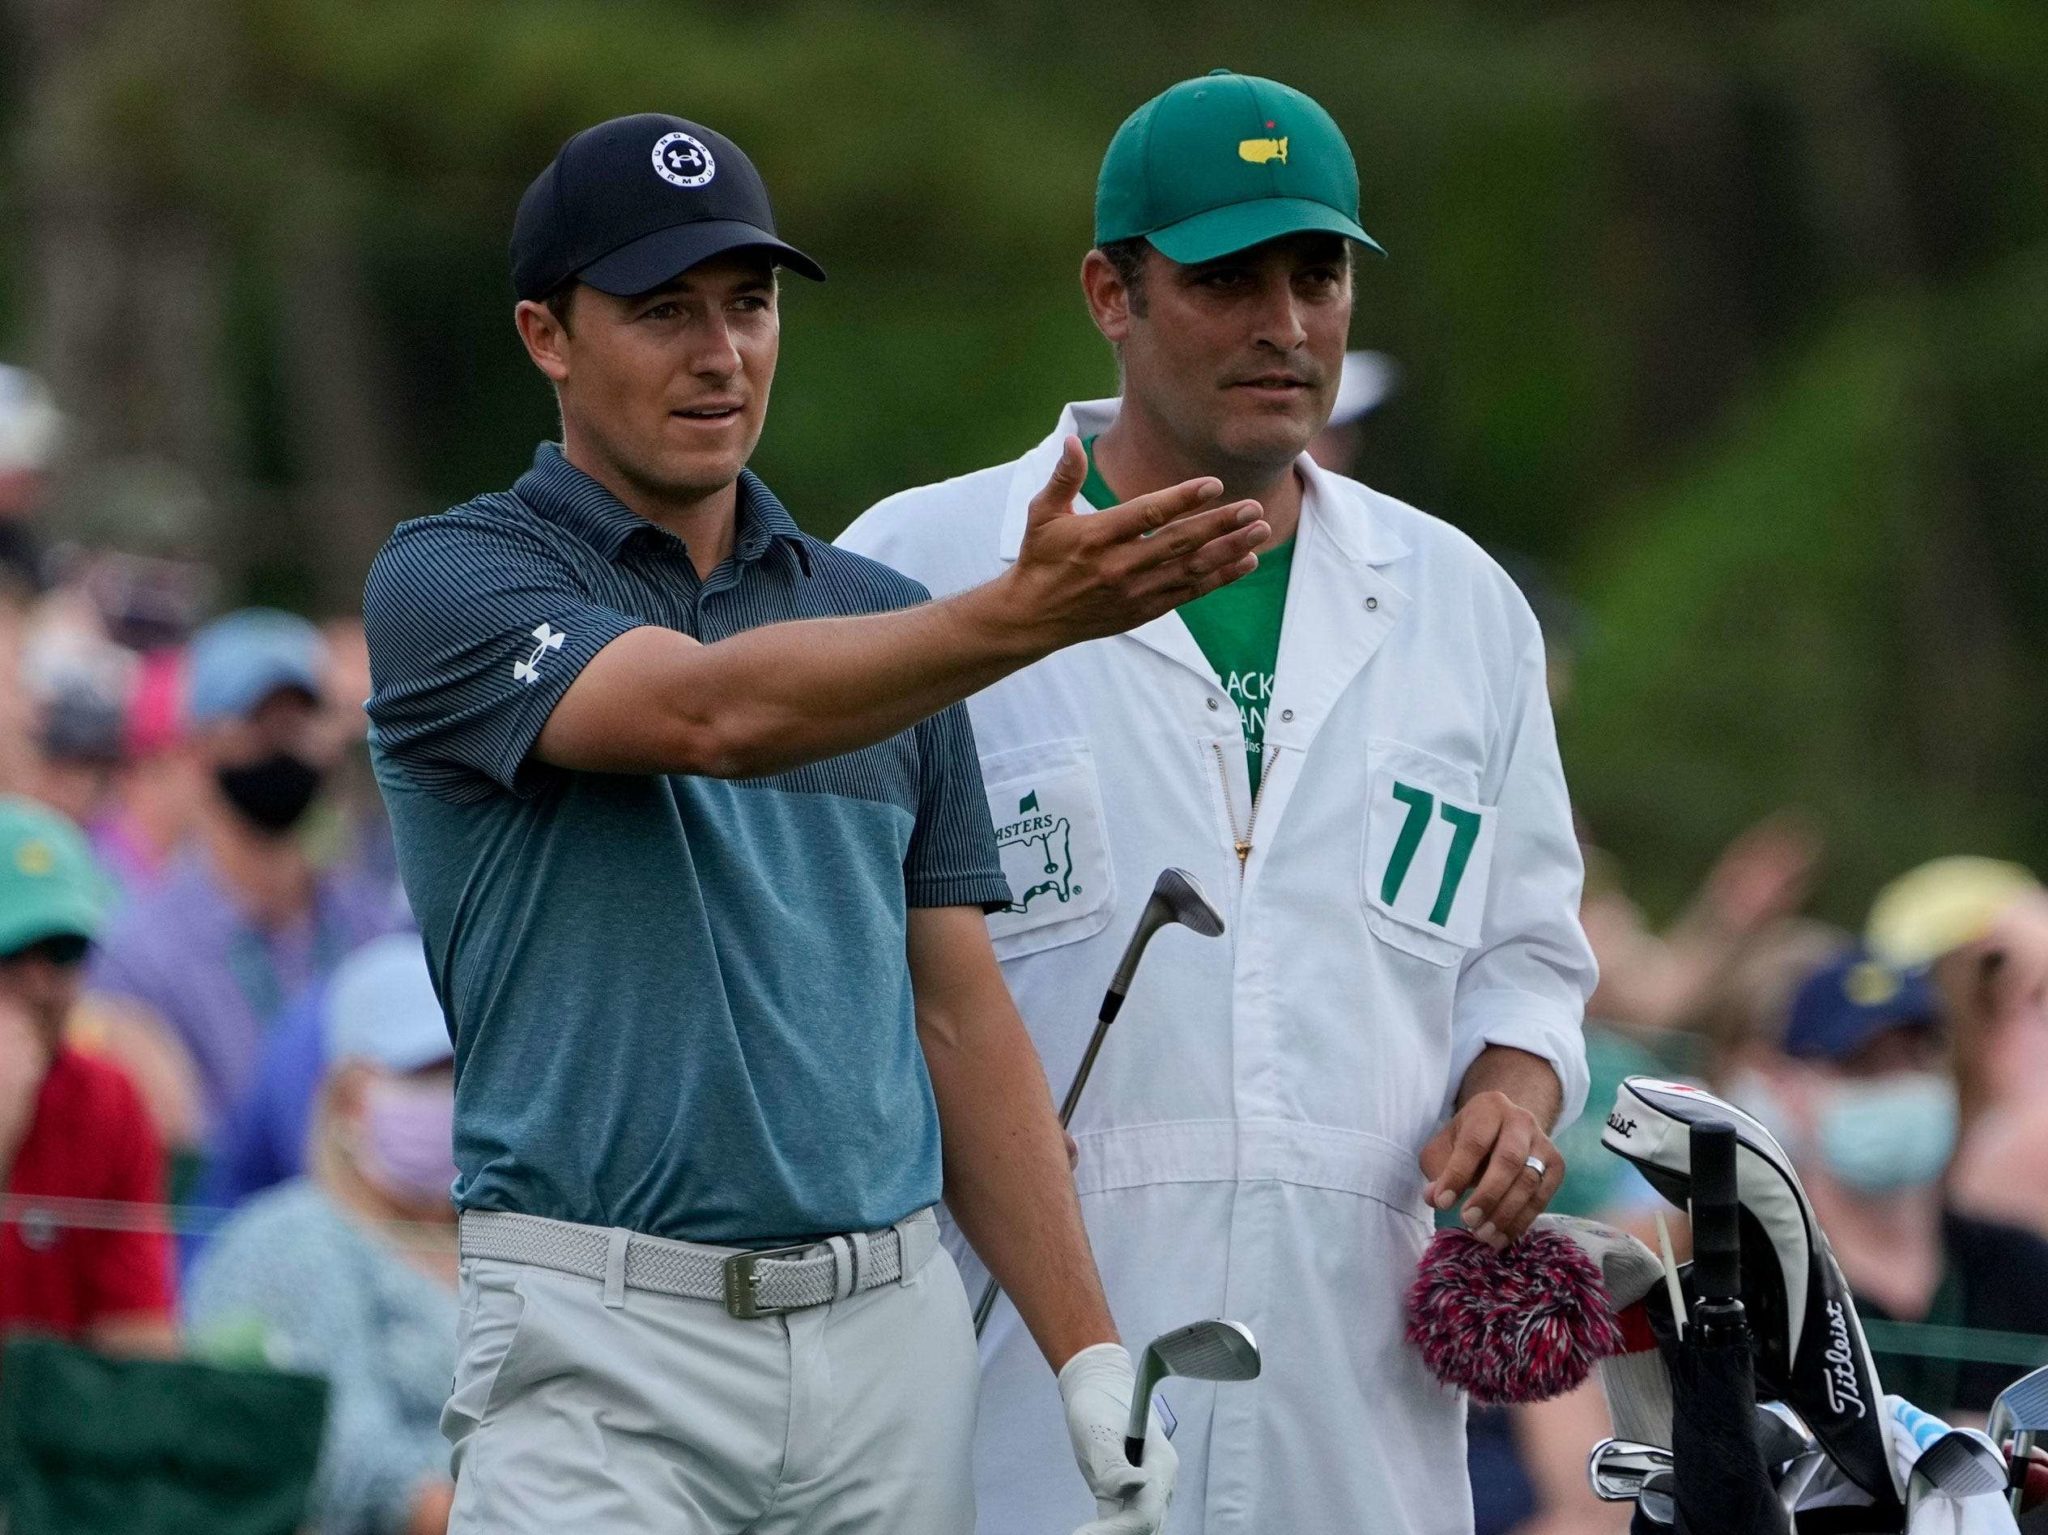 Golfer Jordan Spieth has a ‘safe word’ with his caddie to keep him from getting too negative